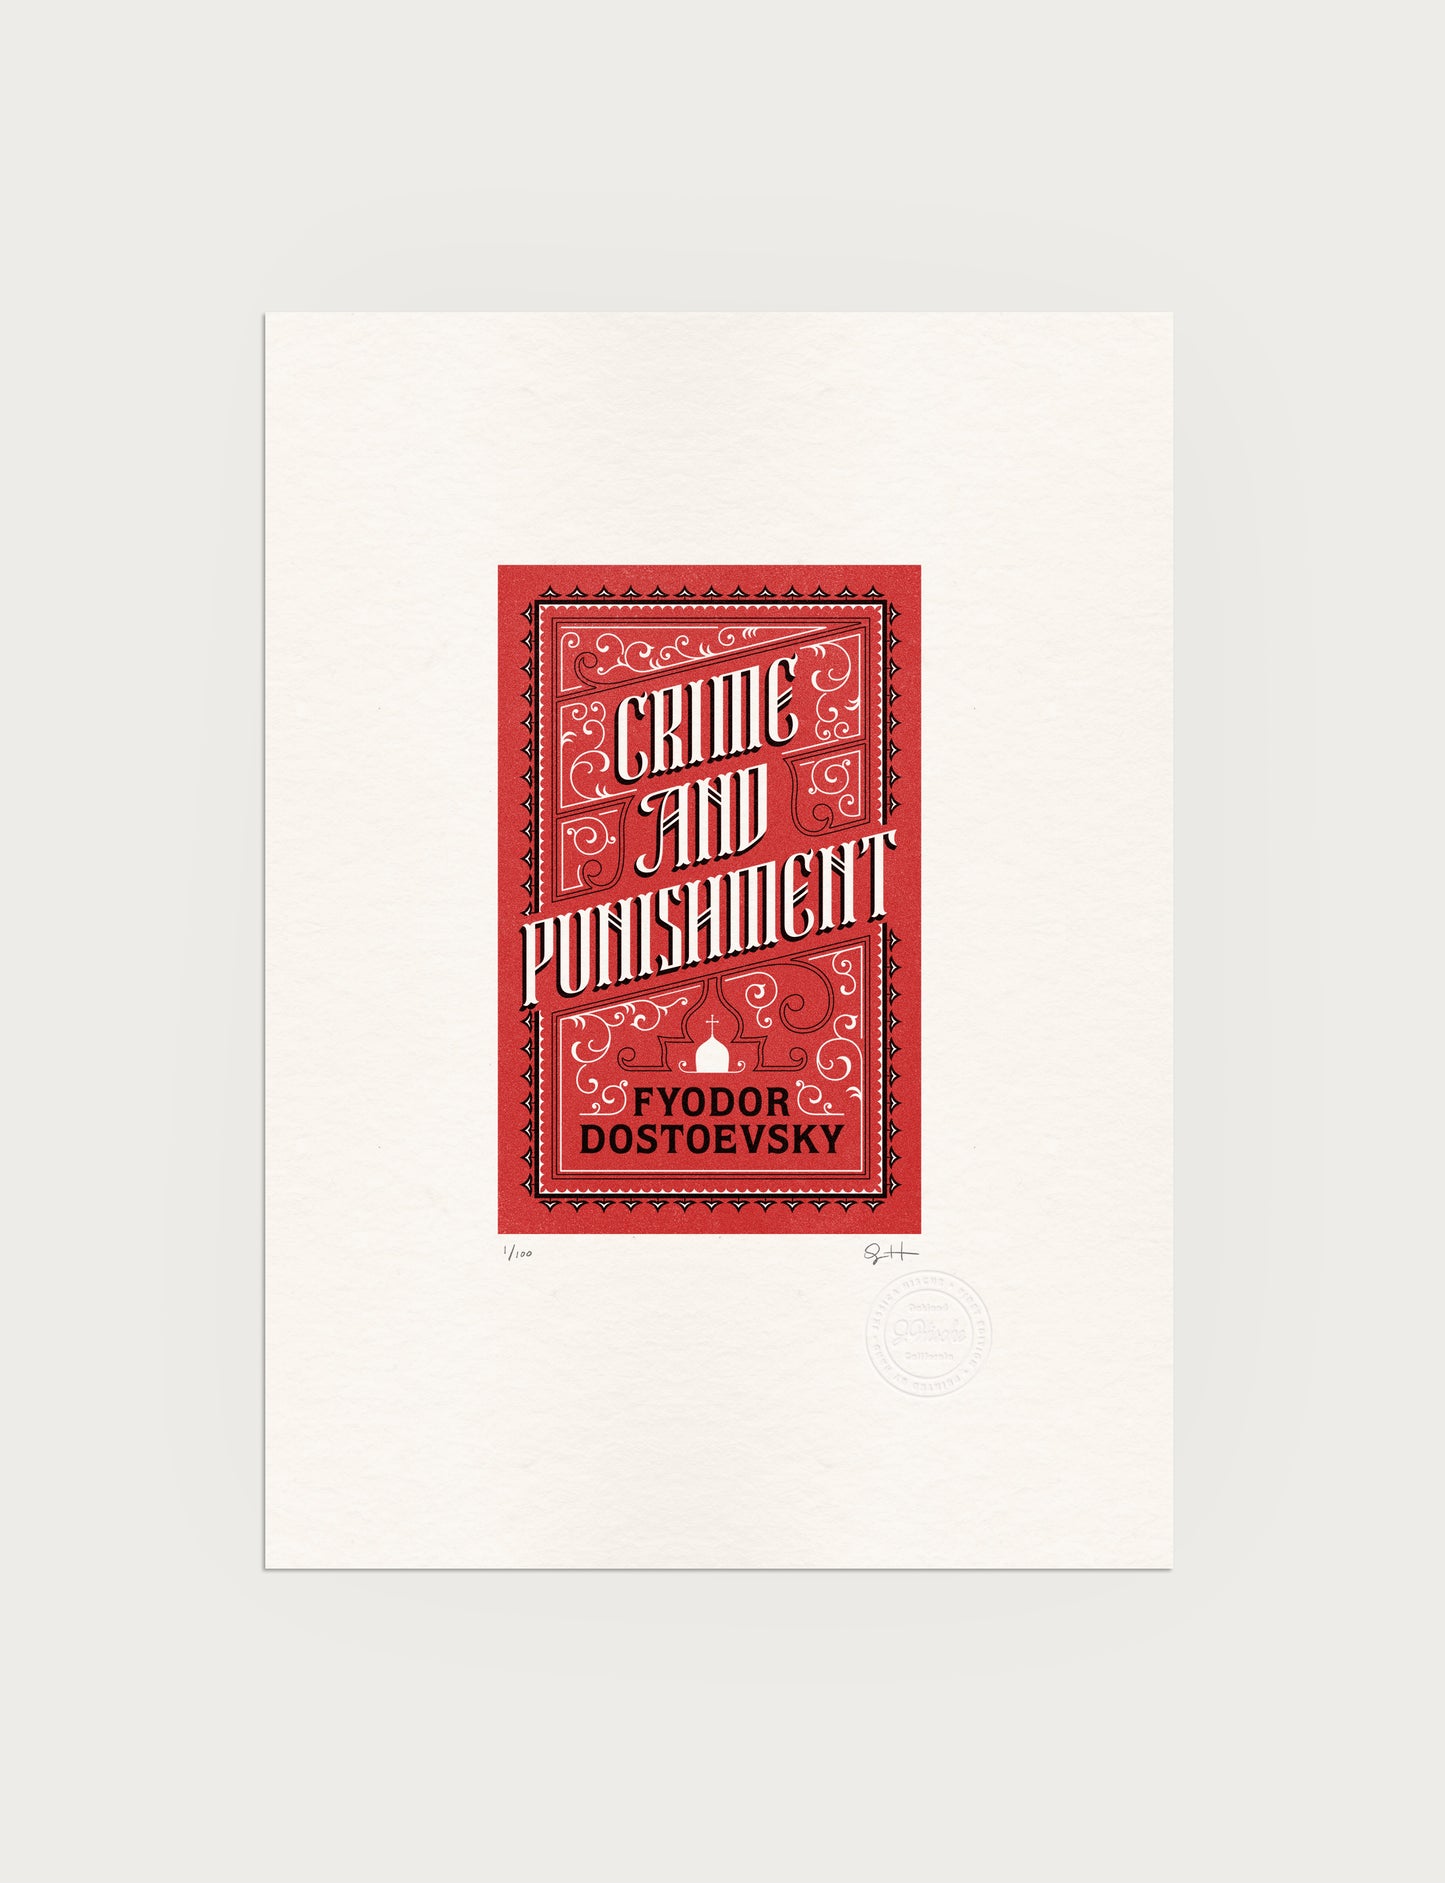 2-color letterpress print in red and black. Printed artwork is an illustrated book cover of Crime and Punishment including custom hand lettering.